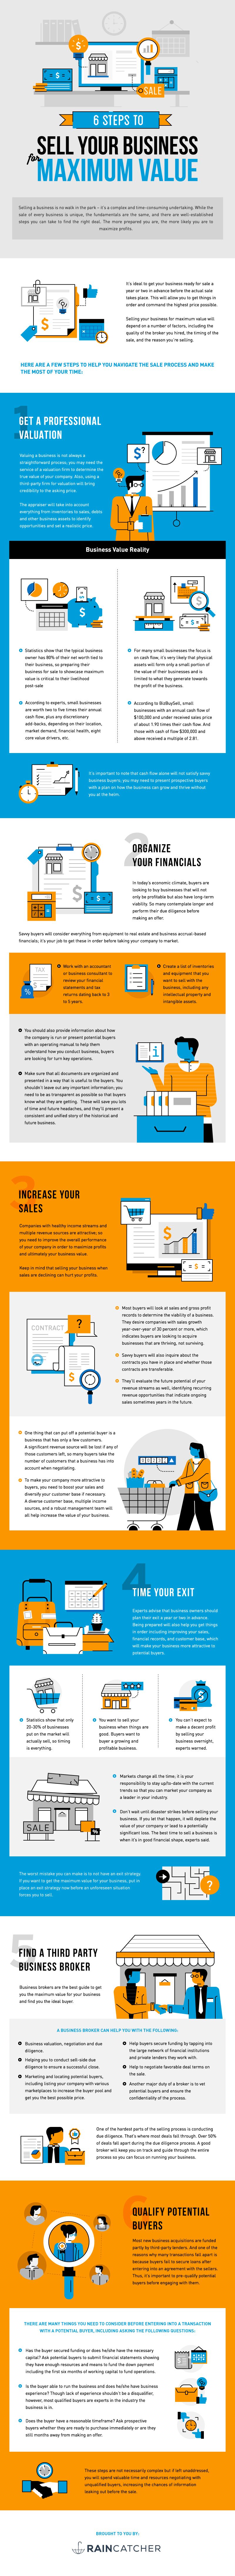 6 Steps To Sell Your Business Infographic